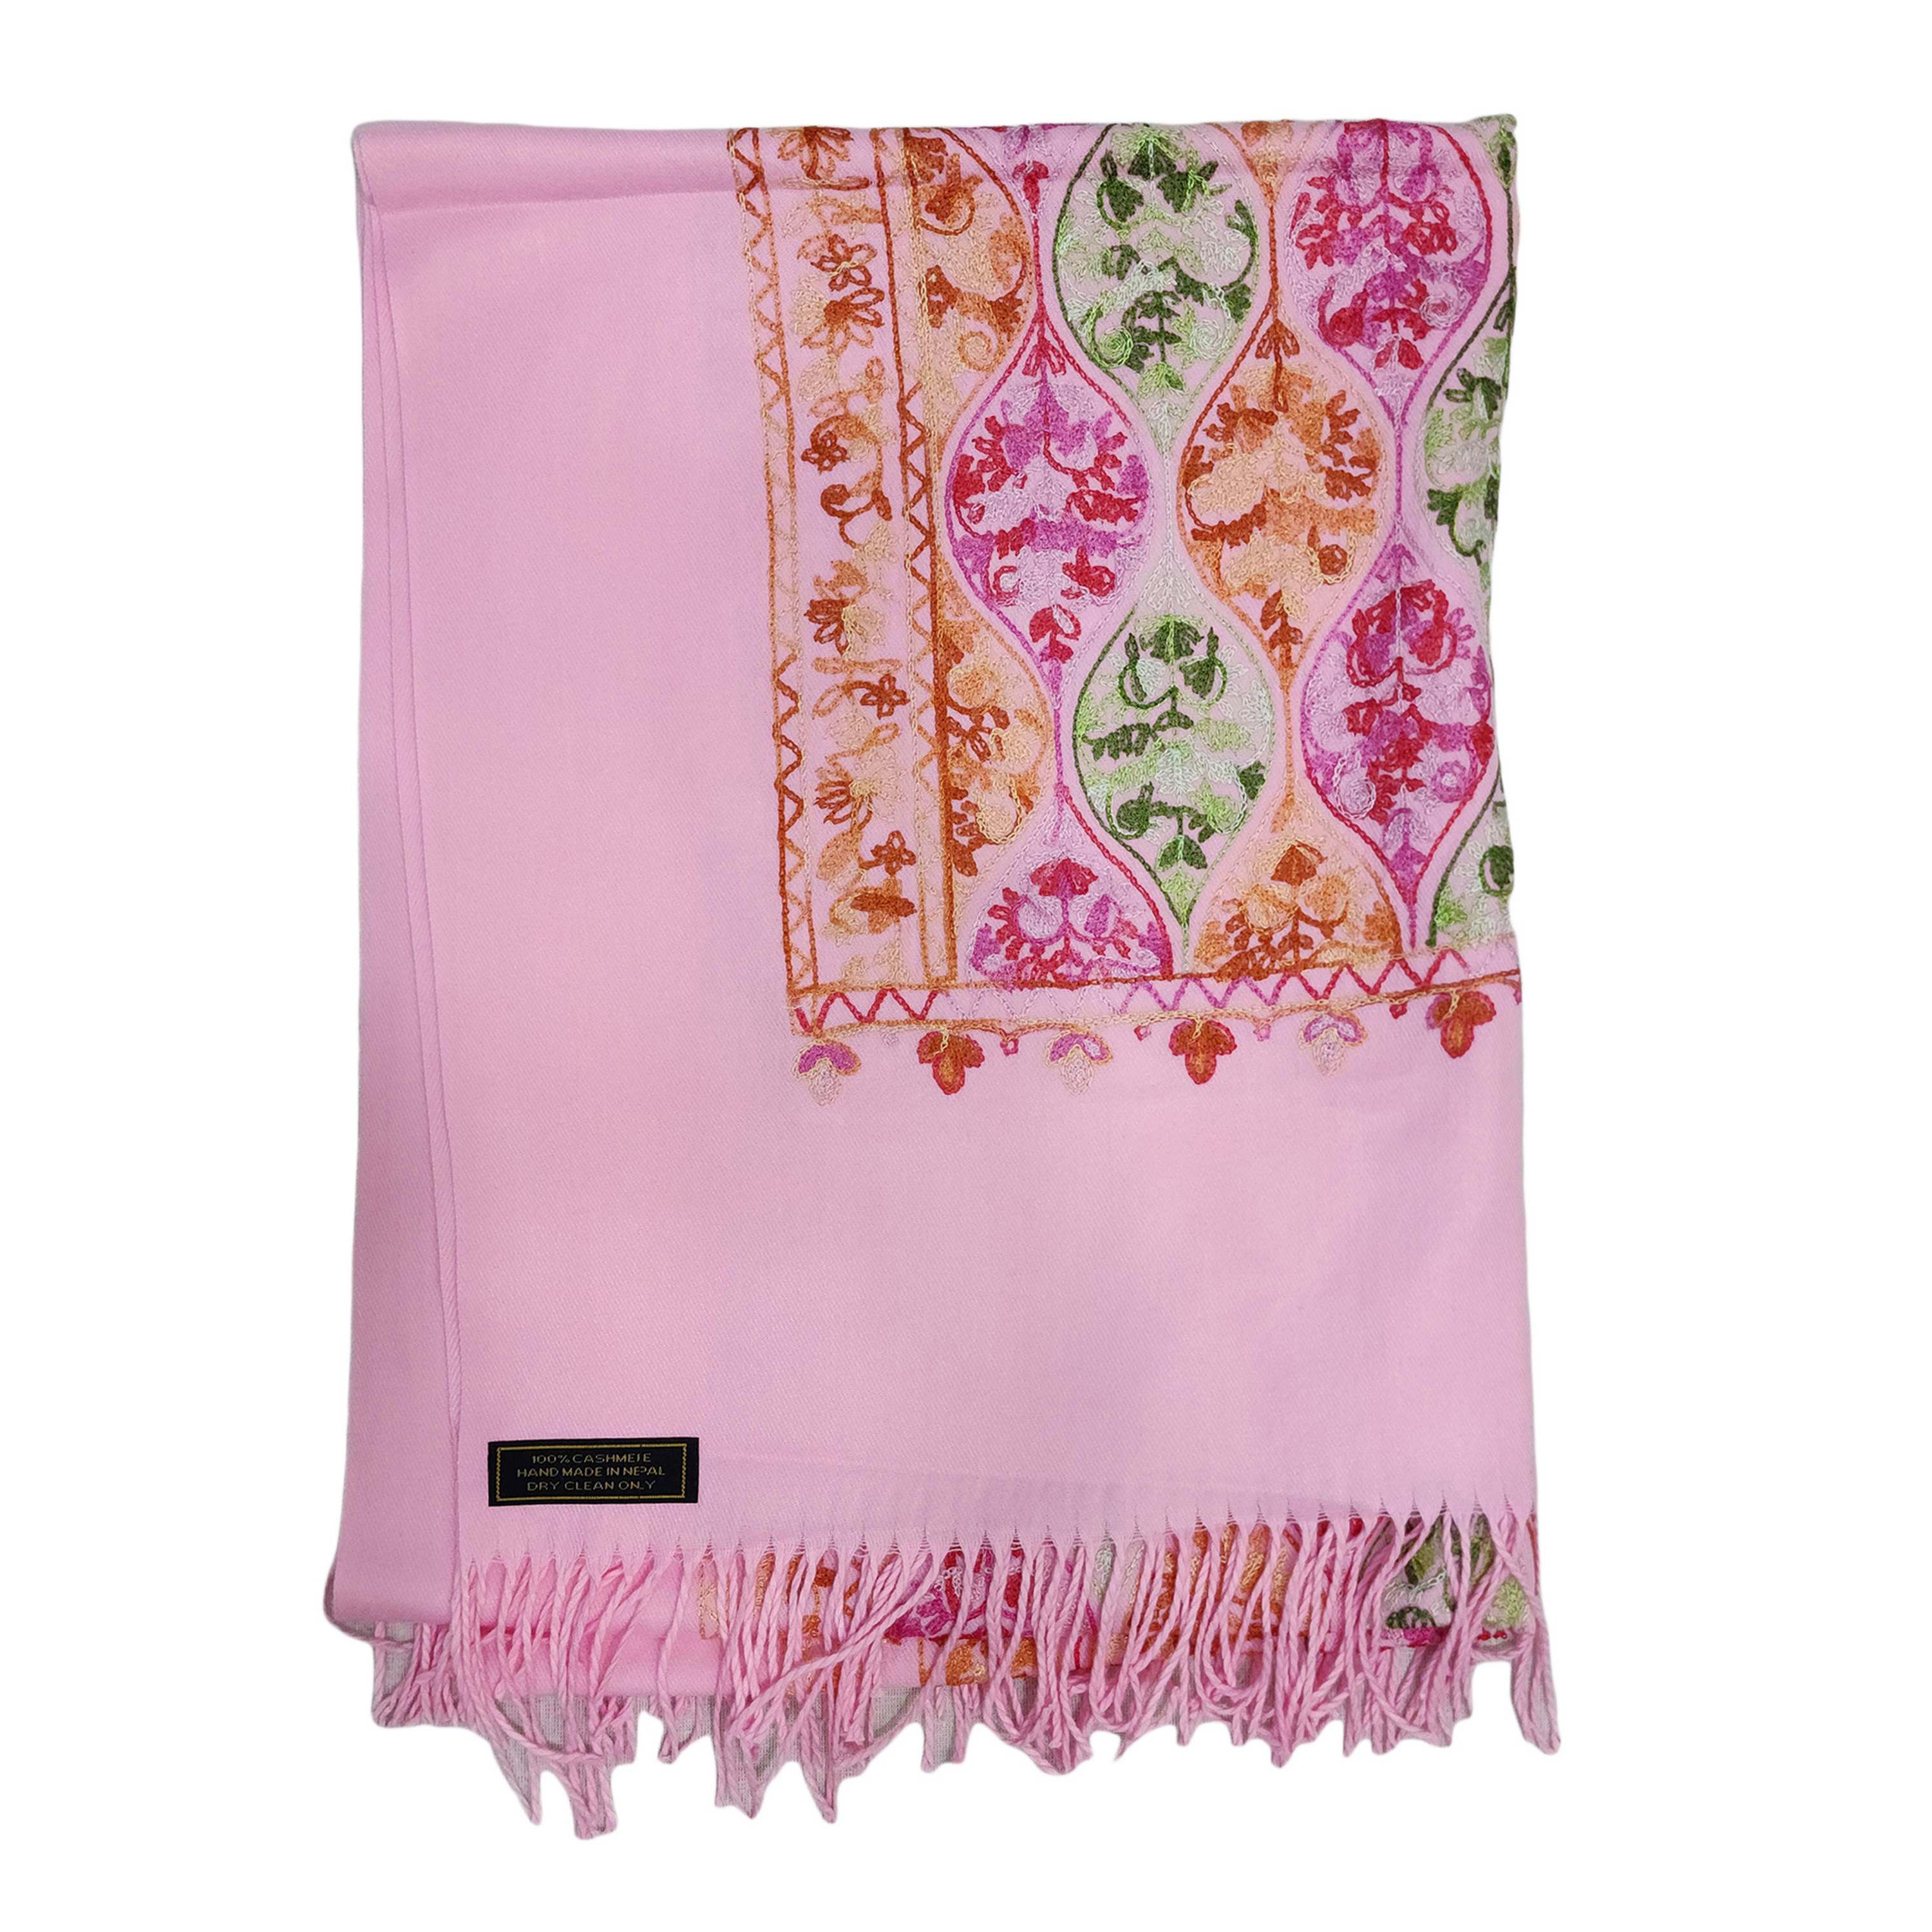 Desigener Shawl, Thick Nepali Shawl, With Heavy Embroidery, Color pale Pink